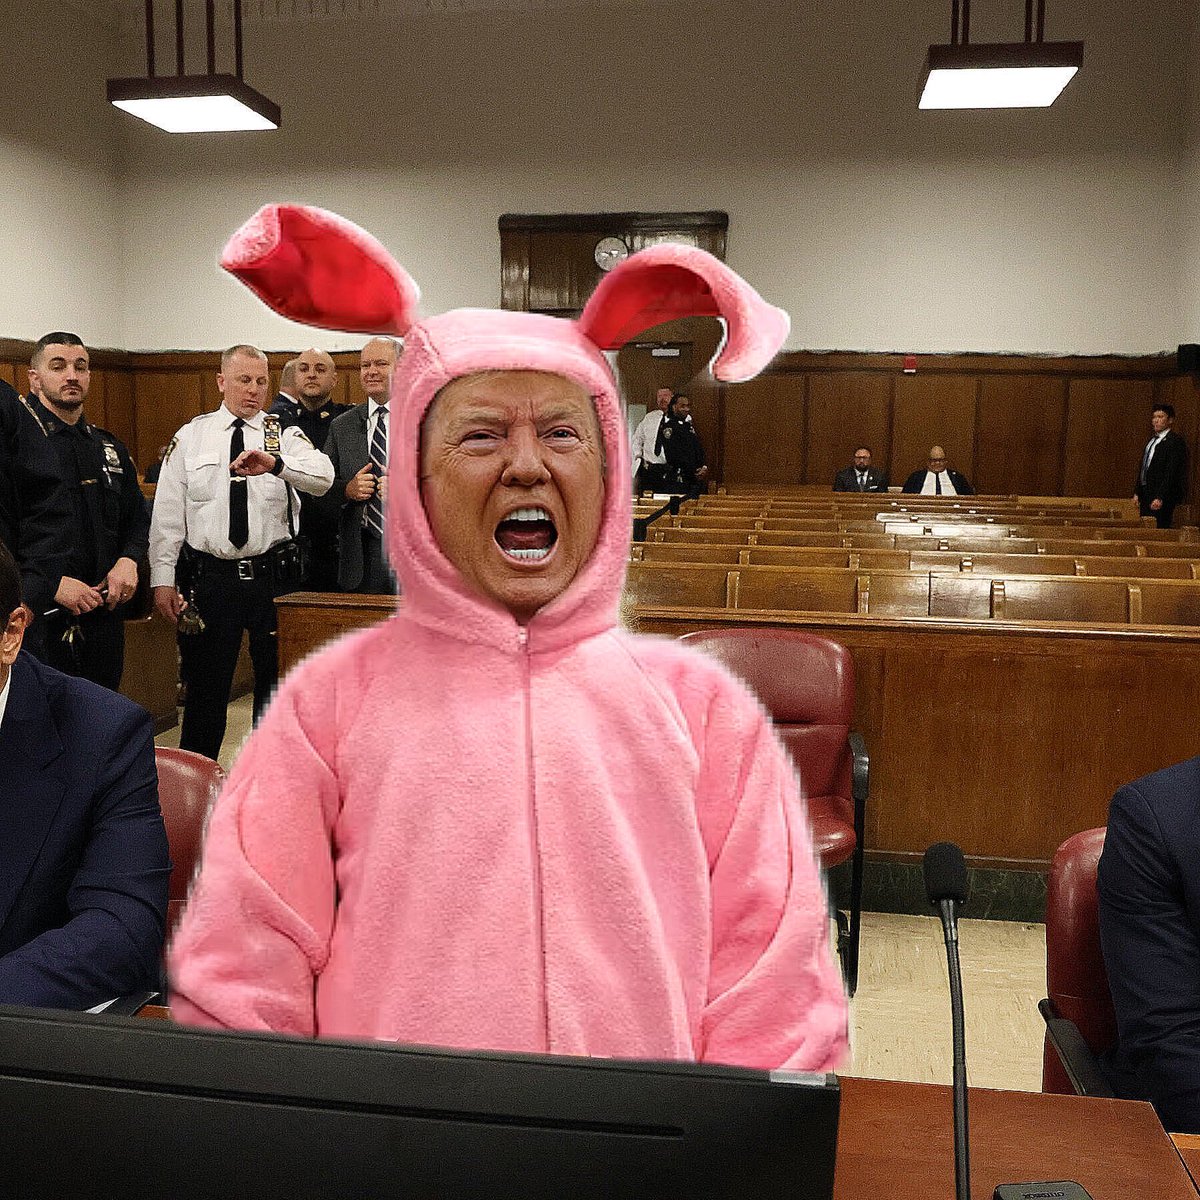 Trump complains he’s cold in the courtroom. I have a solution: